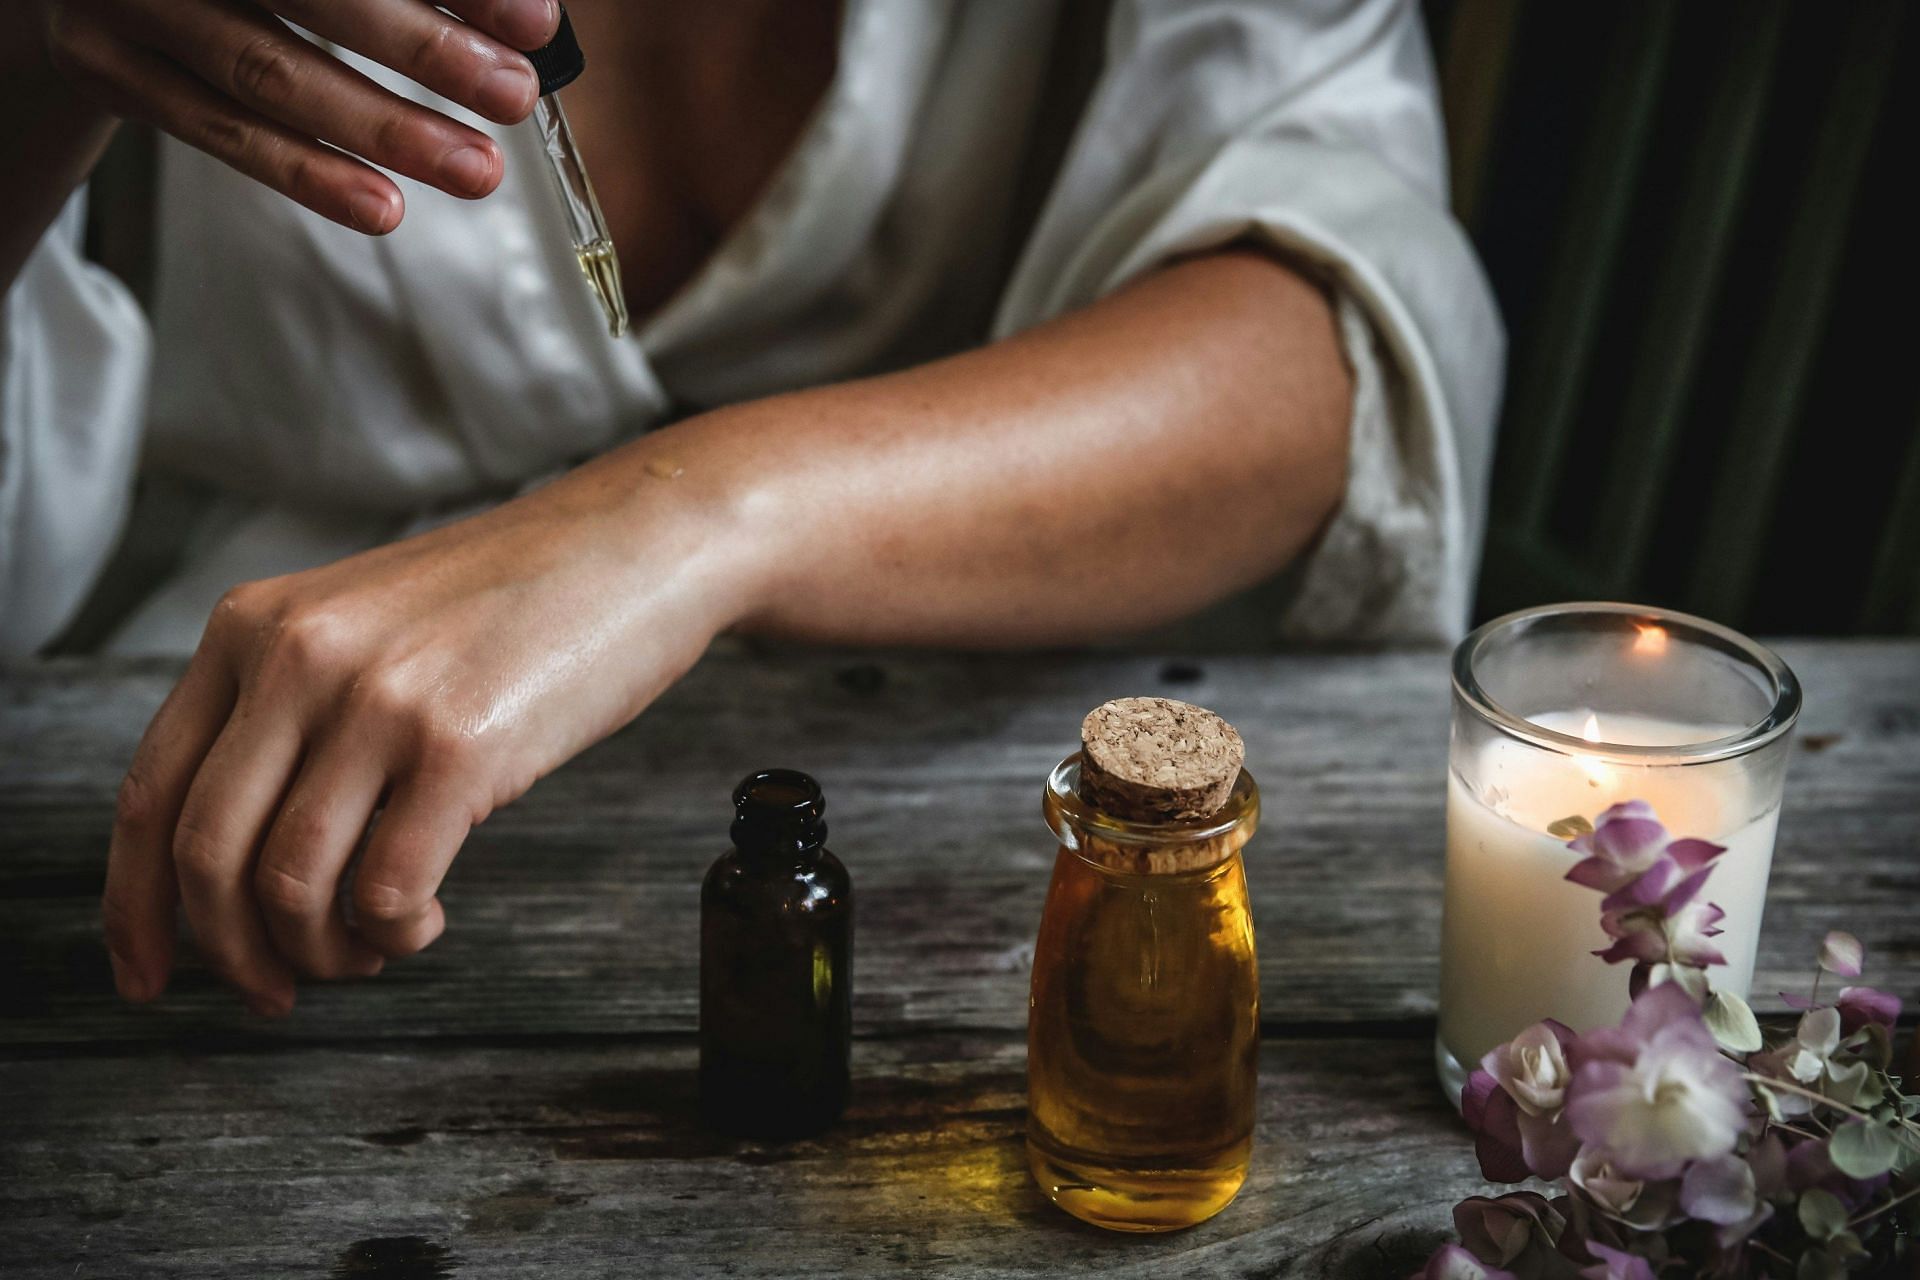 Use castor oil as a home remedy (Image by Chelsea Shapouri/Unsplash)